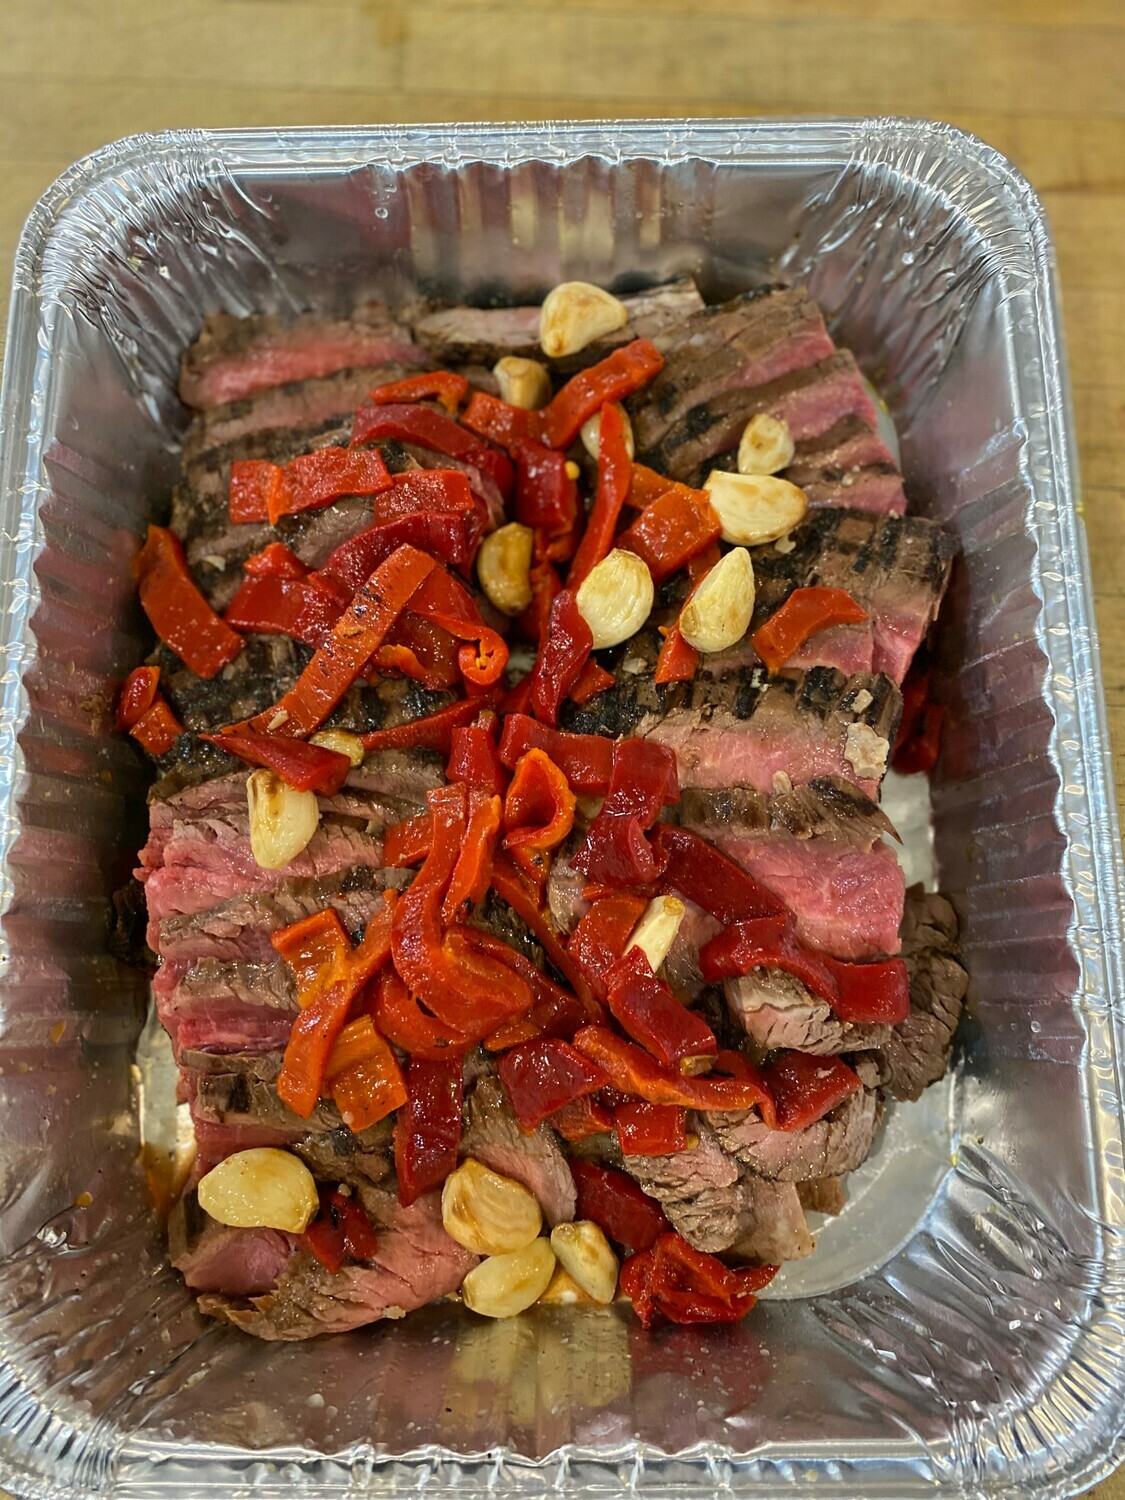 Grilled Flank Steak with Roasted Red Peppers 4-6 Servings